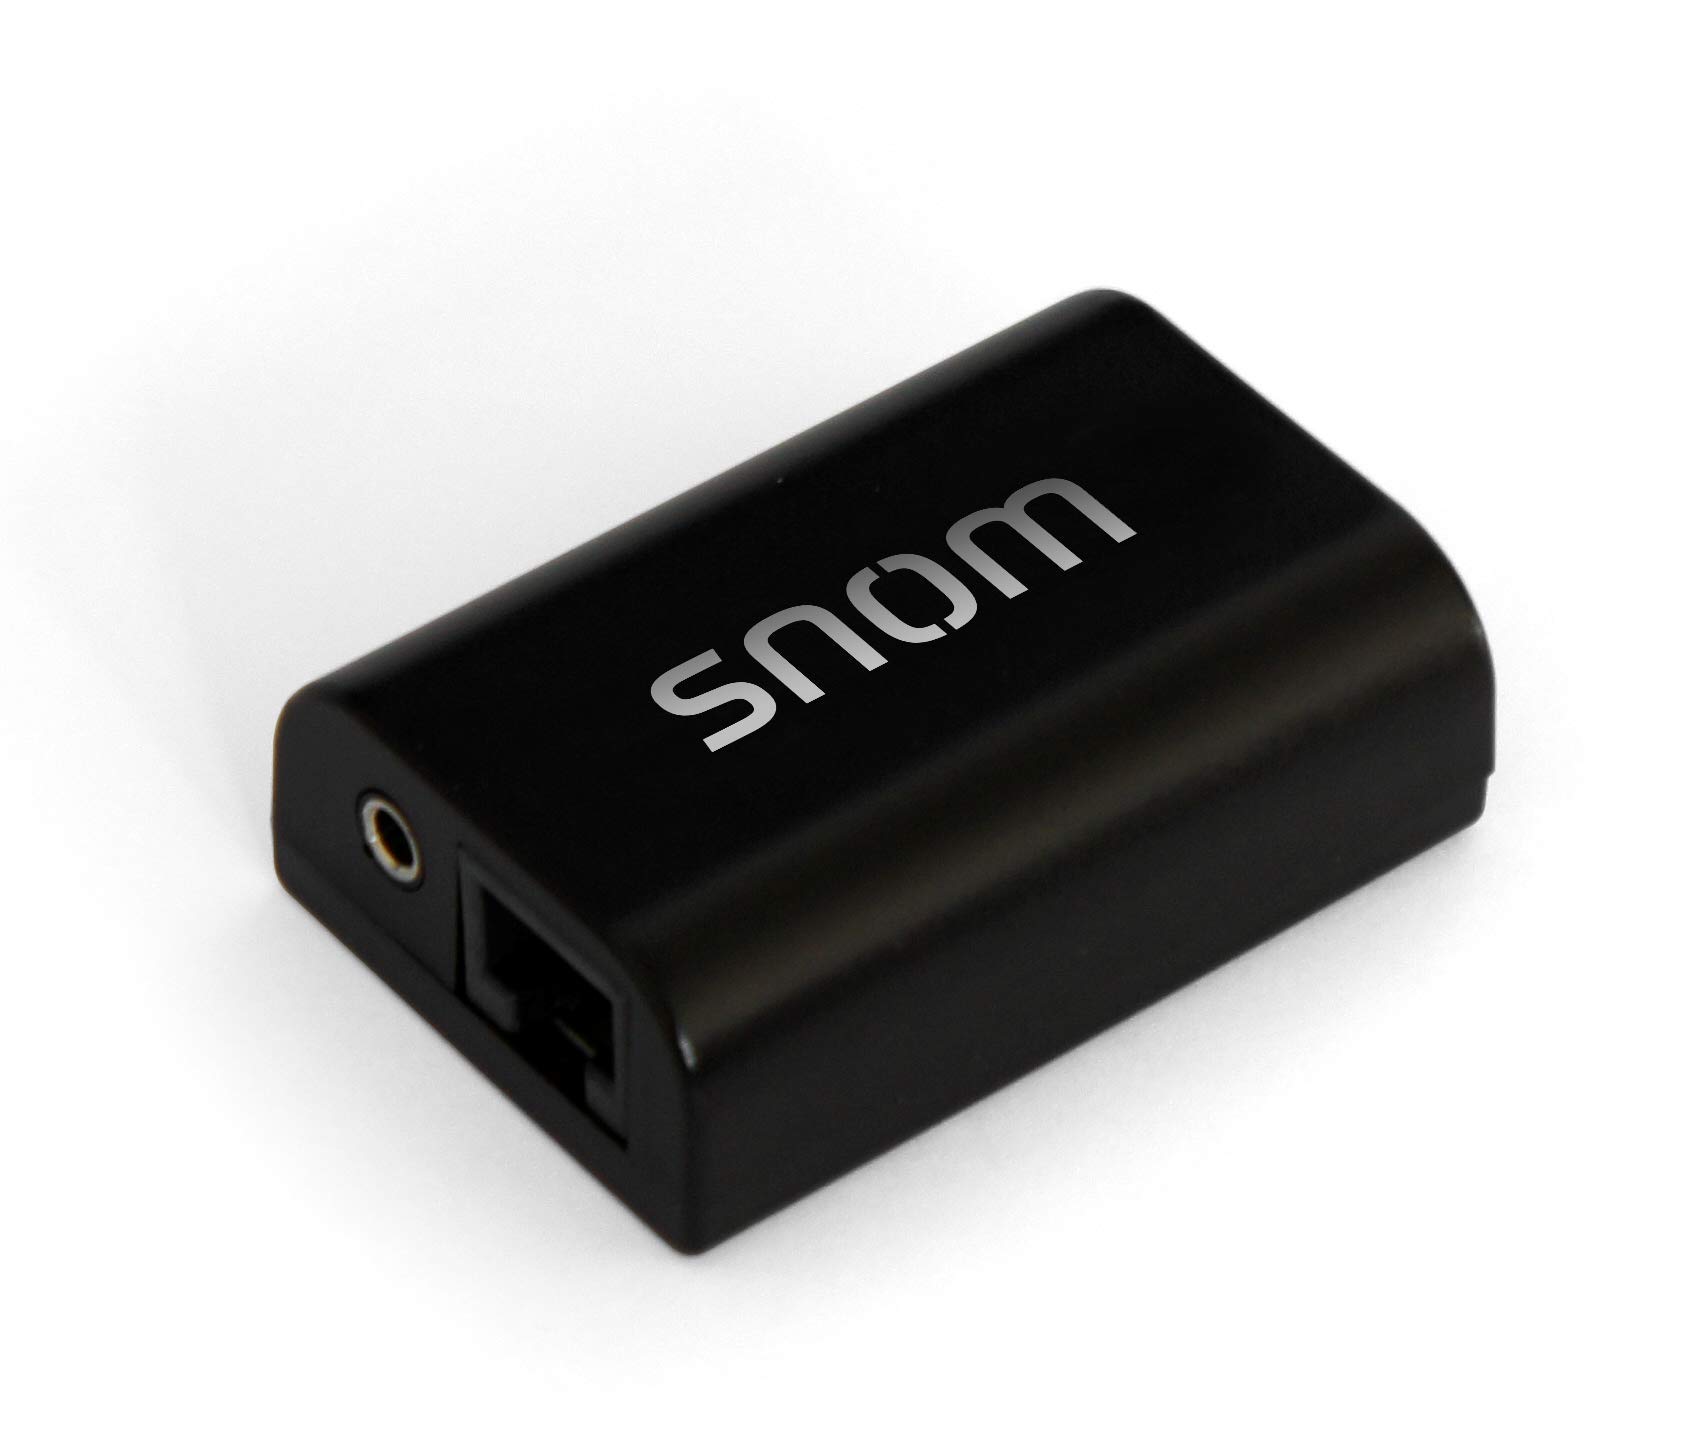 SNOM Wireless Headset Adapter,  Complete freedom of movement, DHSG Standard, No Additional Power Supply Required